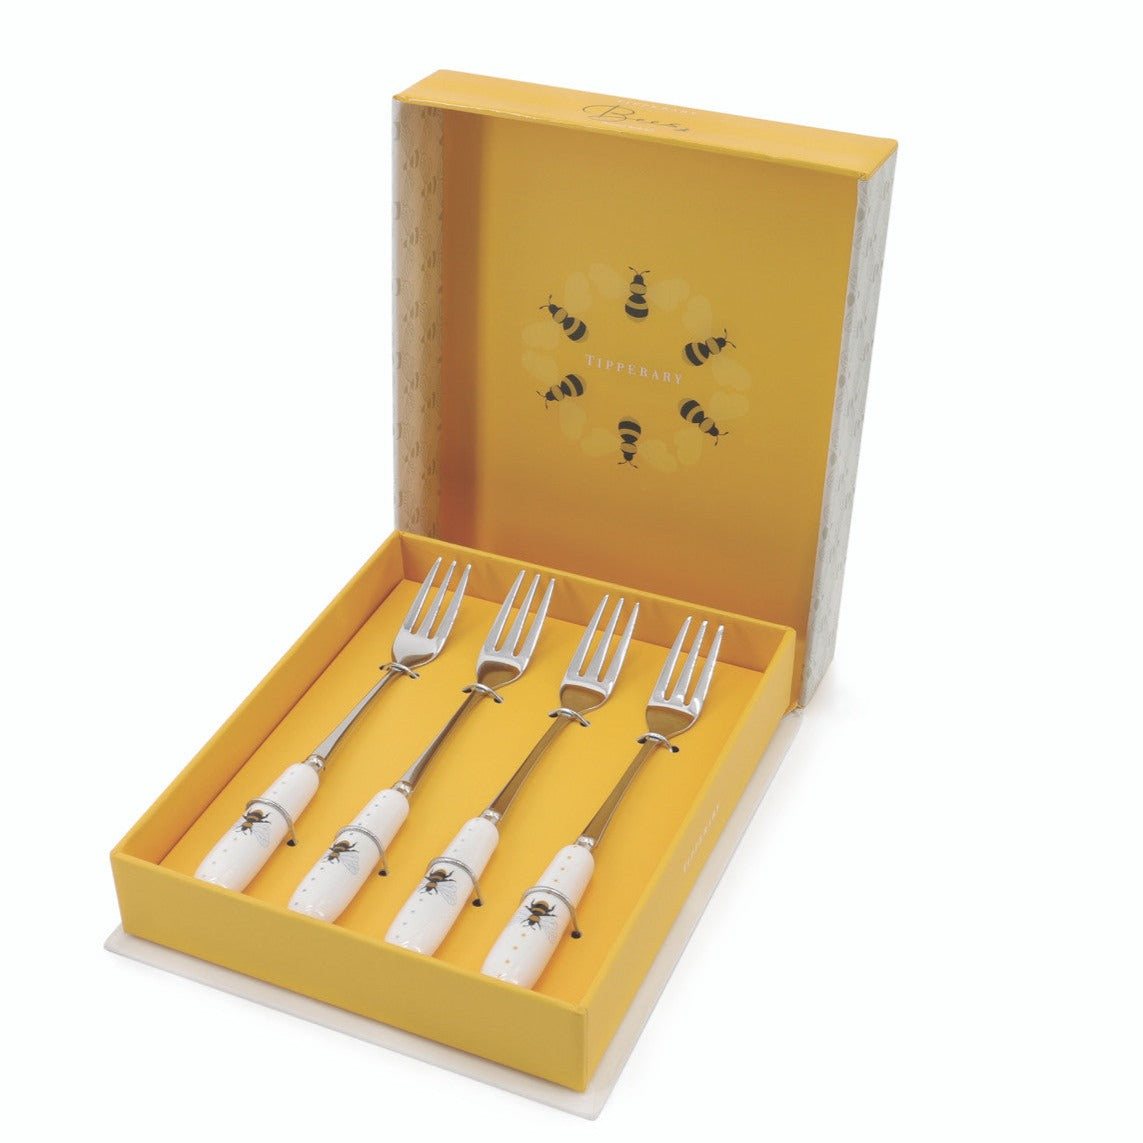 Tipperary Crystal Bees - Bee Set of 4 Dessert Forks